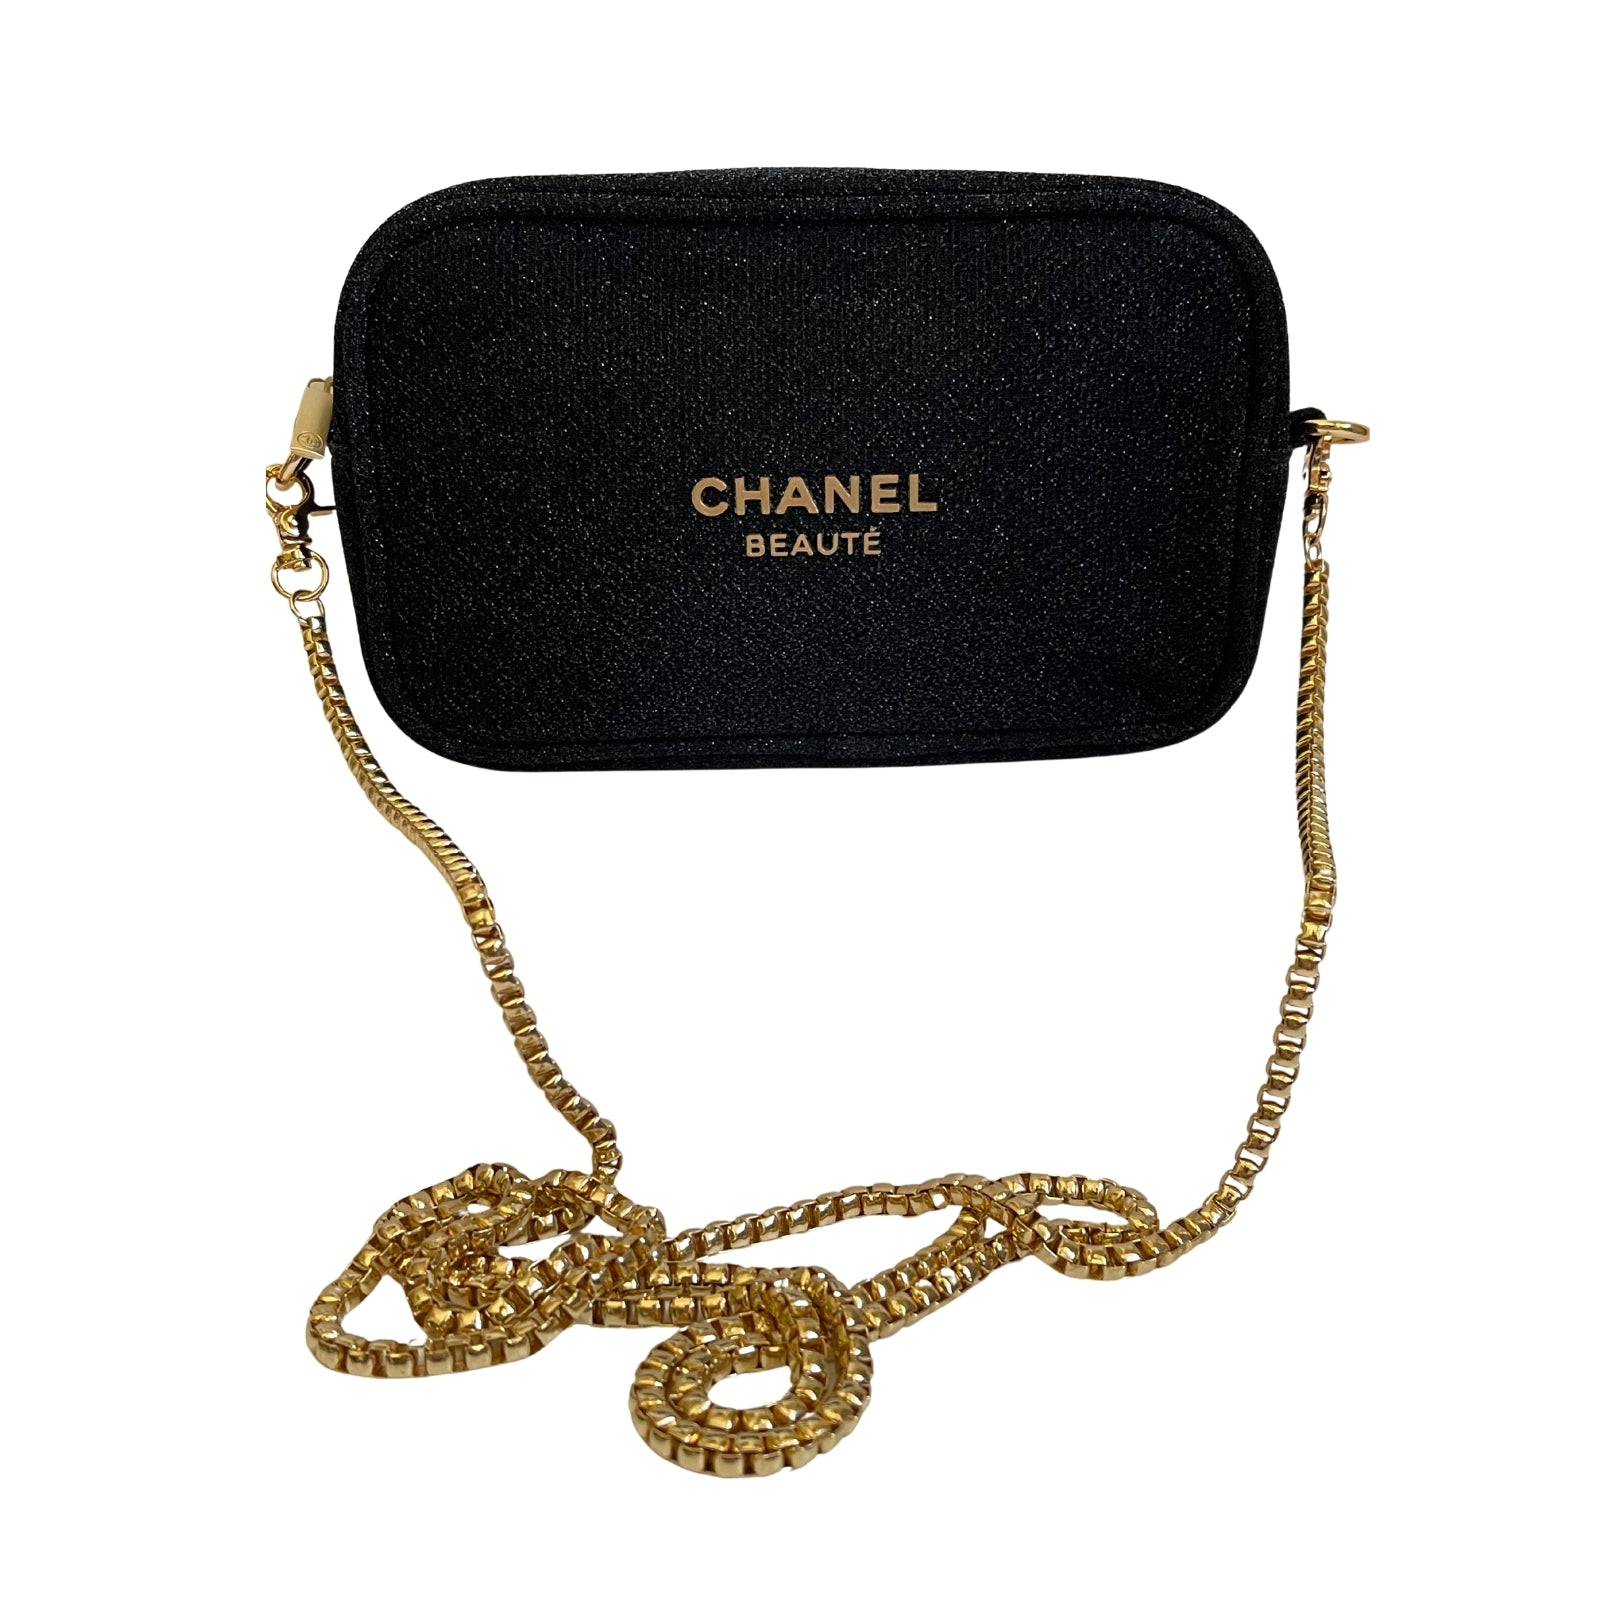 CHANEL+Beaute+Gold+Glitter+Cosmetic+Makeup+Bag+Pouch+Clutch+VIP+